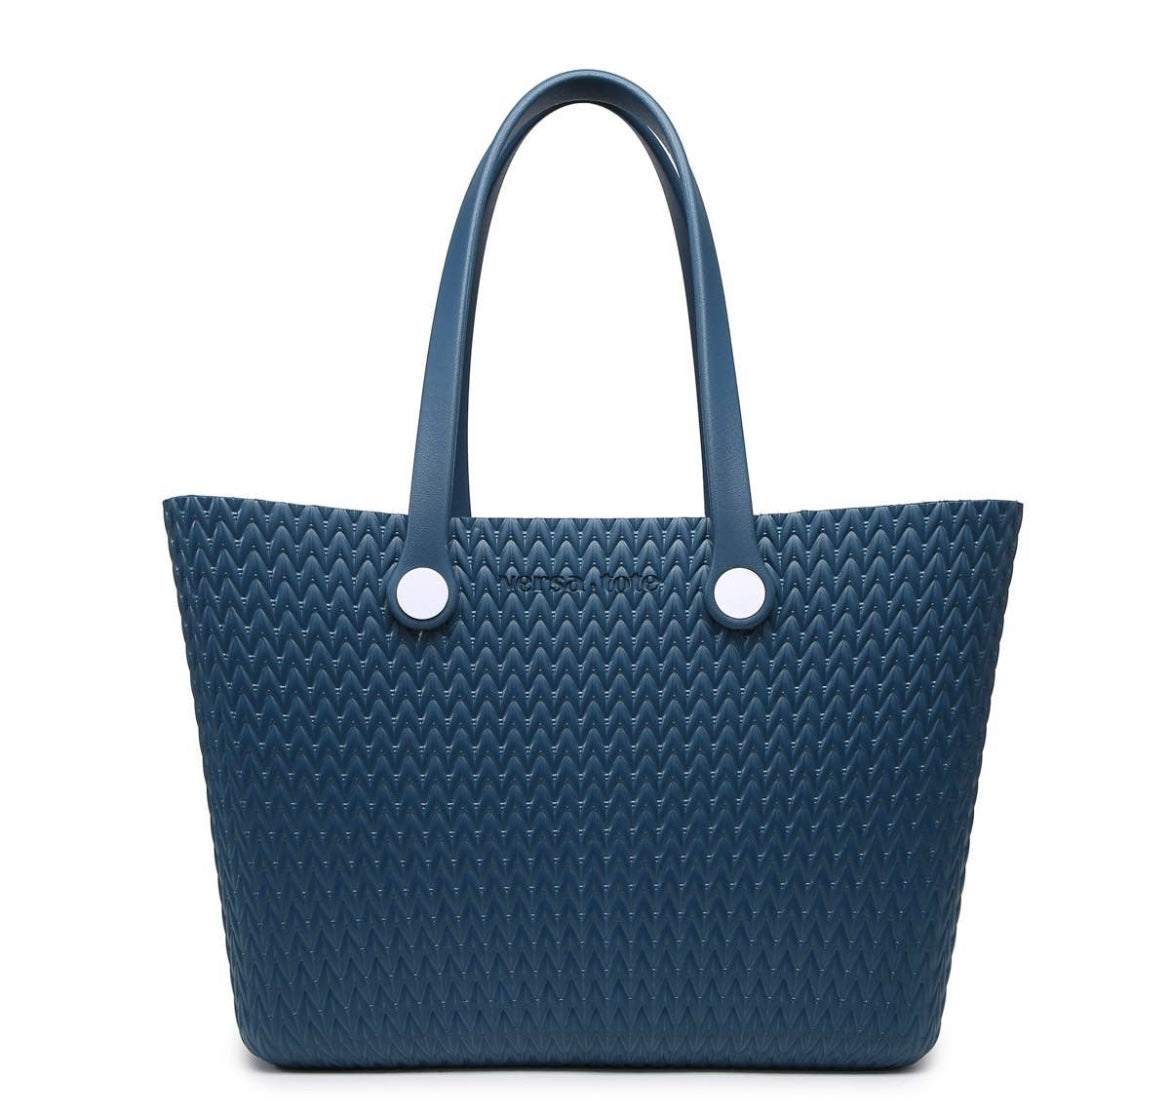 Textured Navy Tote